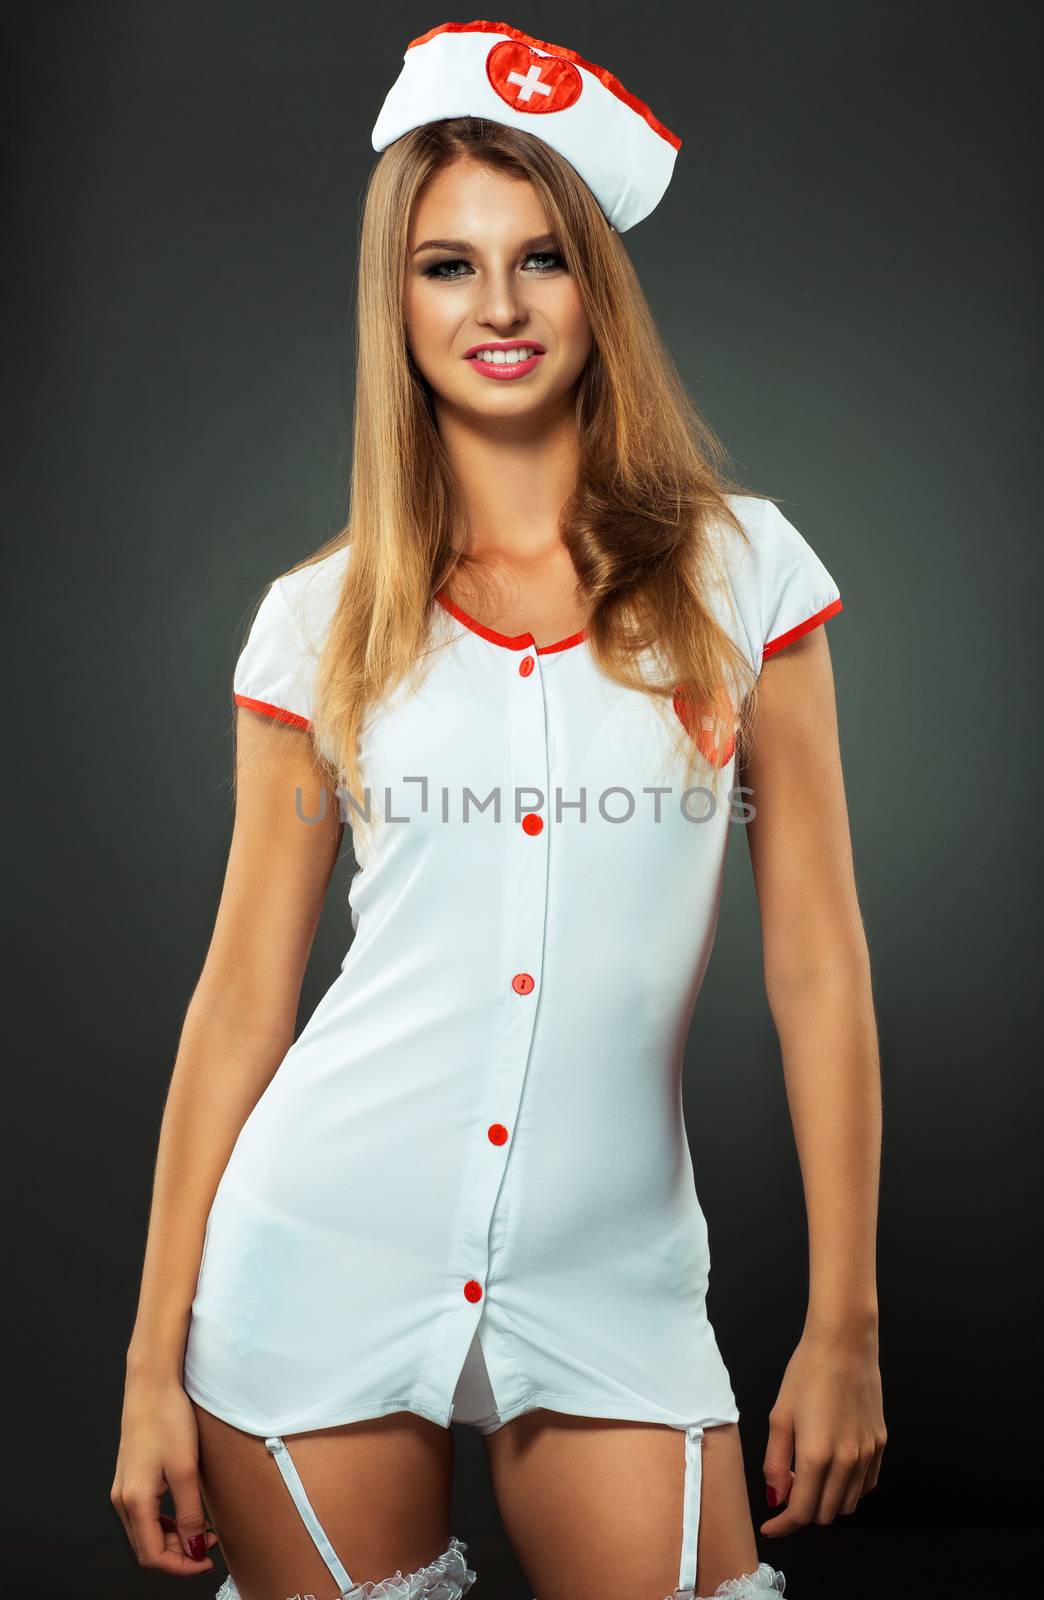 Young and beautiful dancer in nurse costume posing on studio background